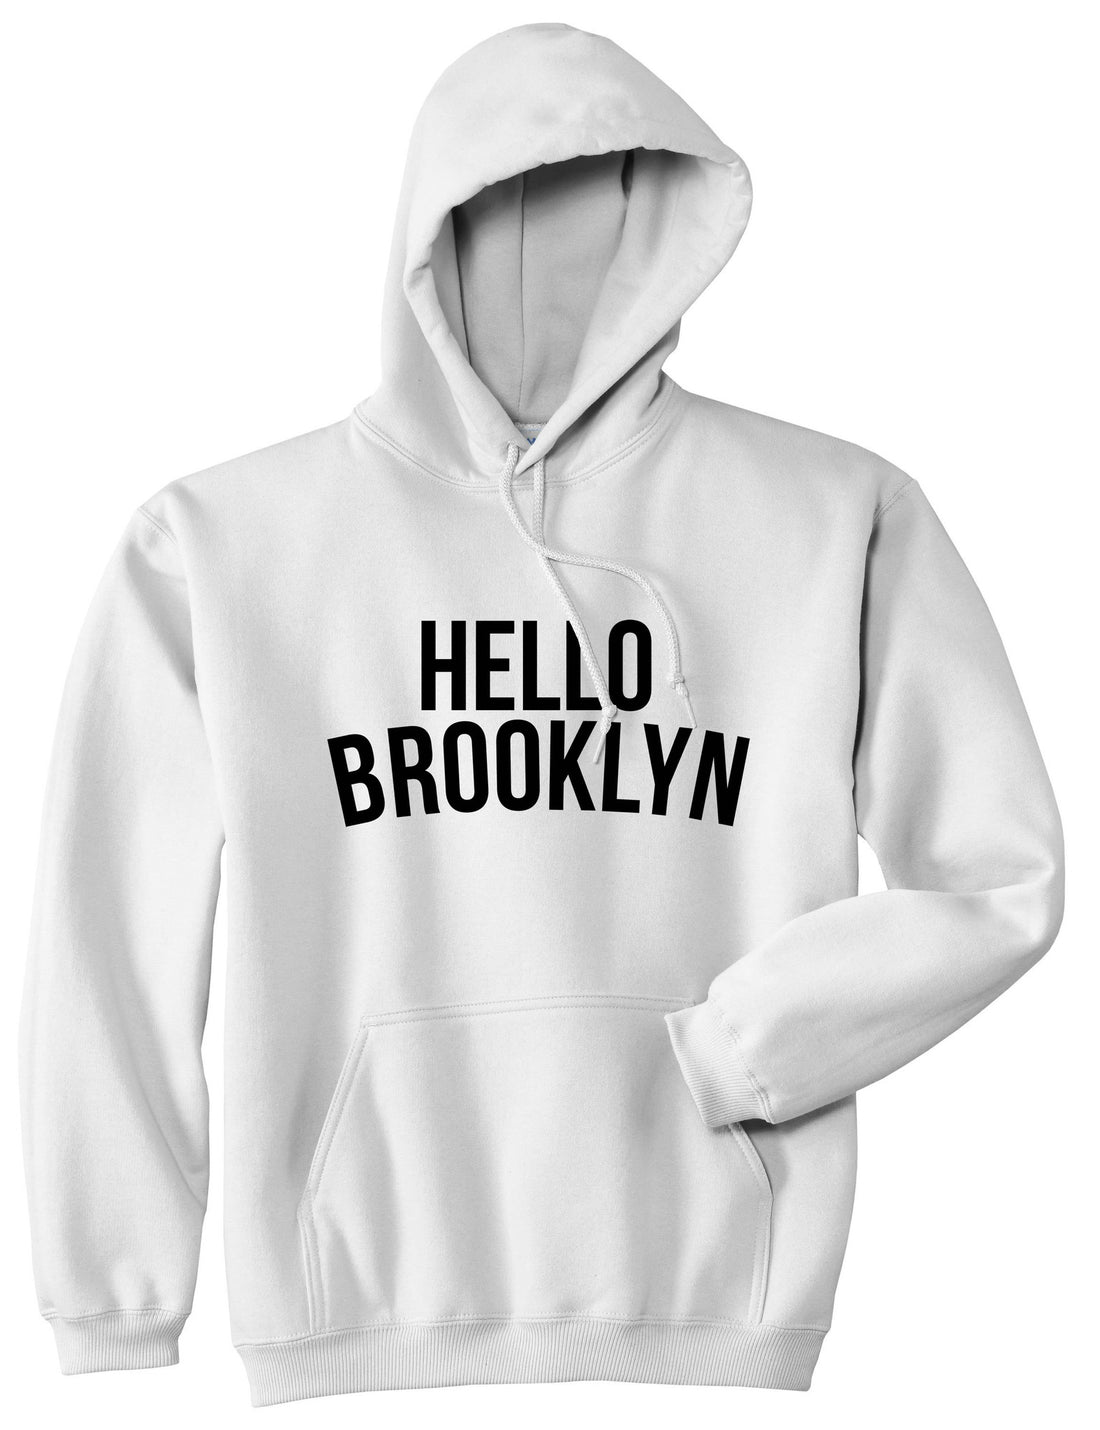 Hello Brooklyn Pullover Hoodie in White By Kings Of NY